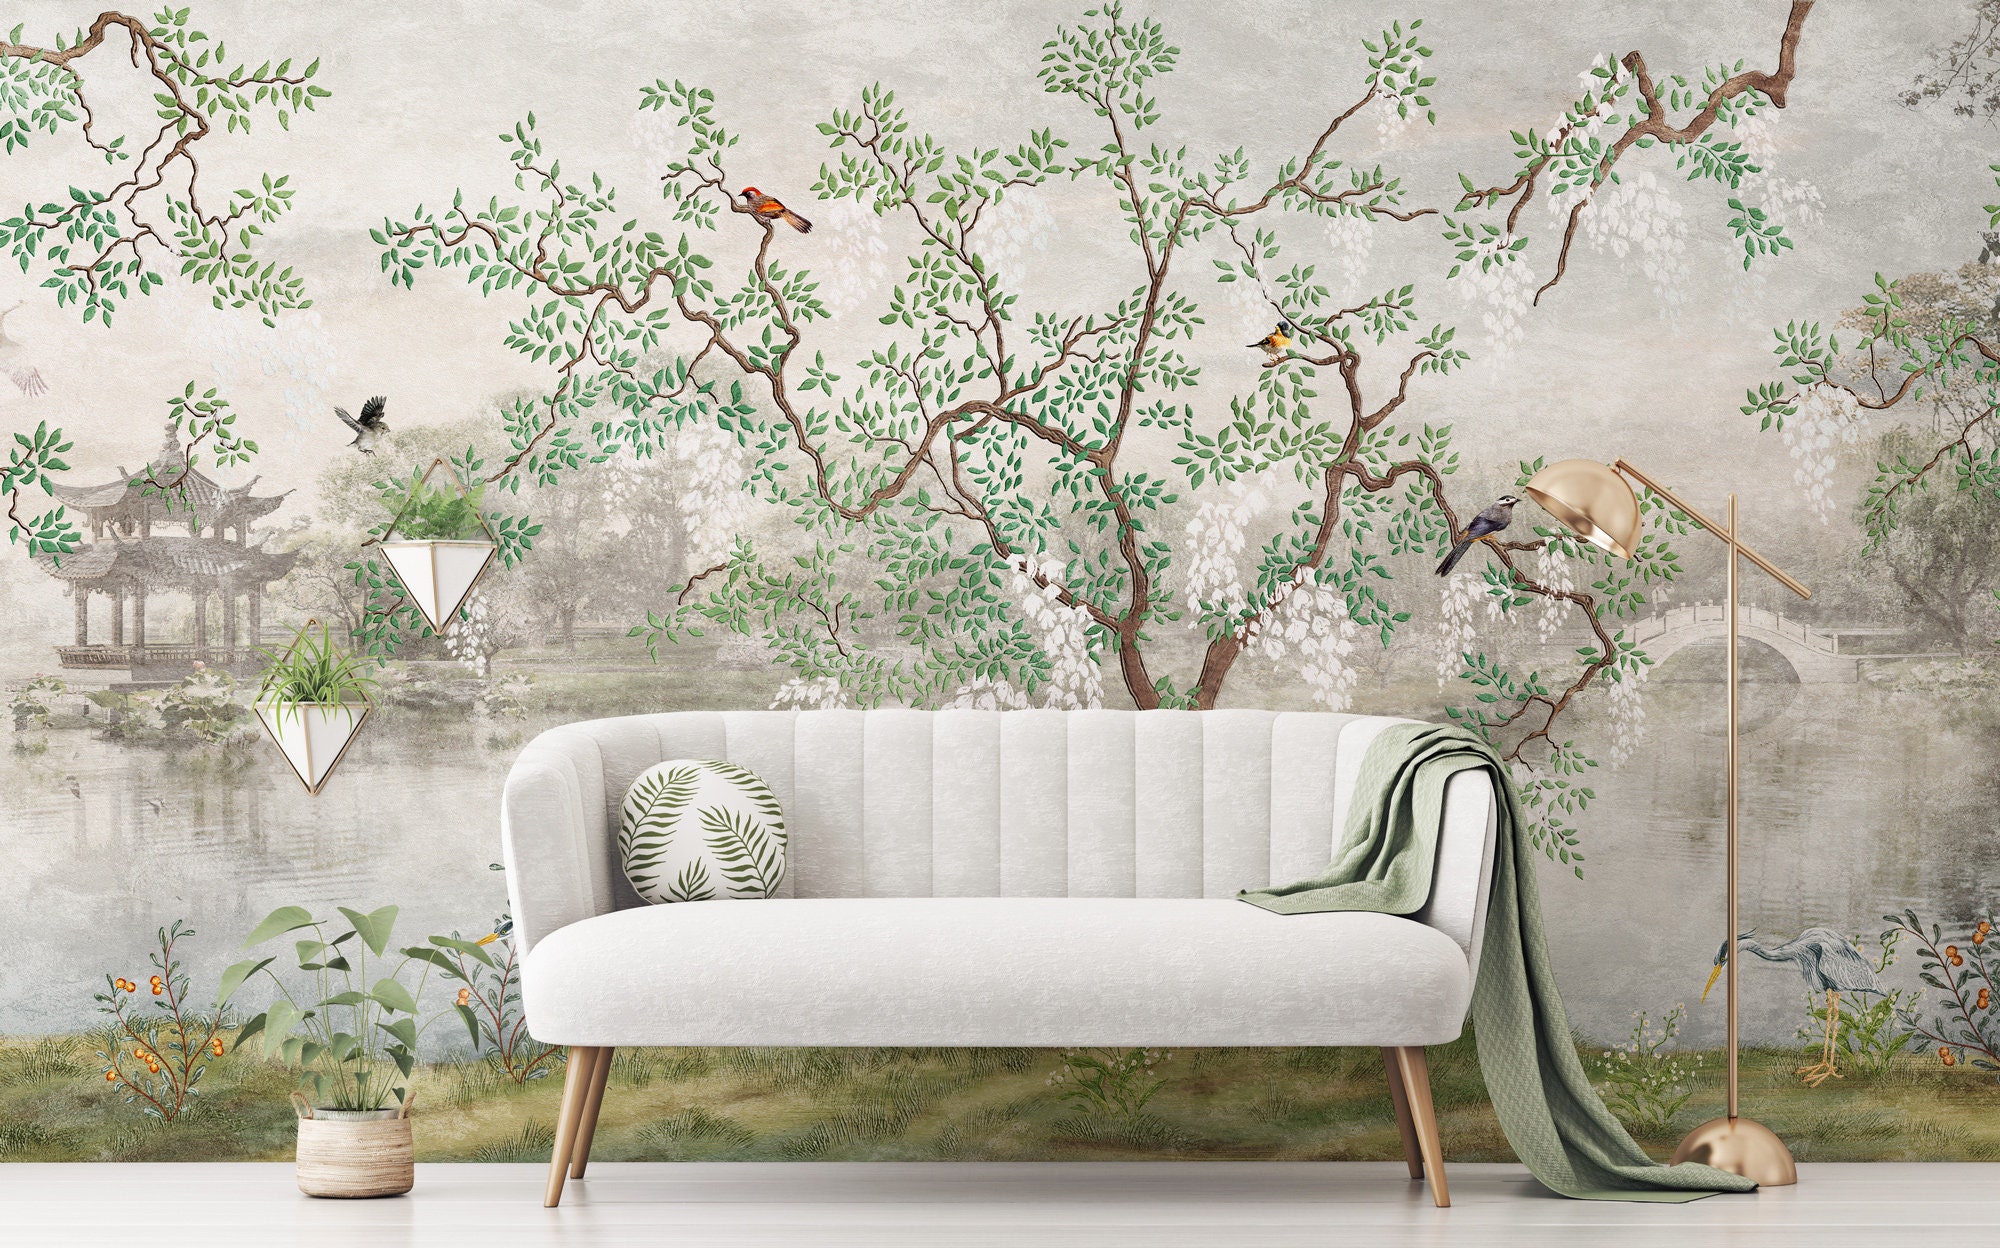 Chinoiserie Wallpaper Peel and Stick Wallpaper Removable  Etsy  Chinoiserie  wallpaper Diy wallpaper Peel and stick wallpaper